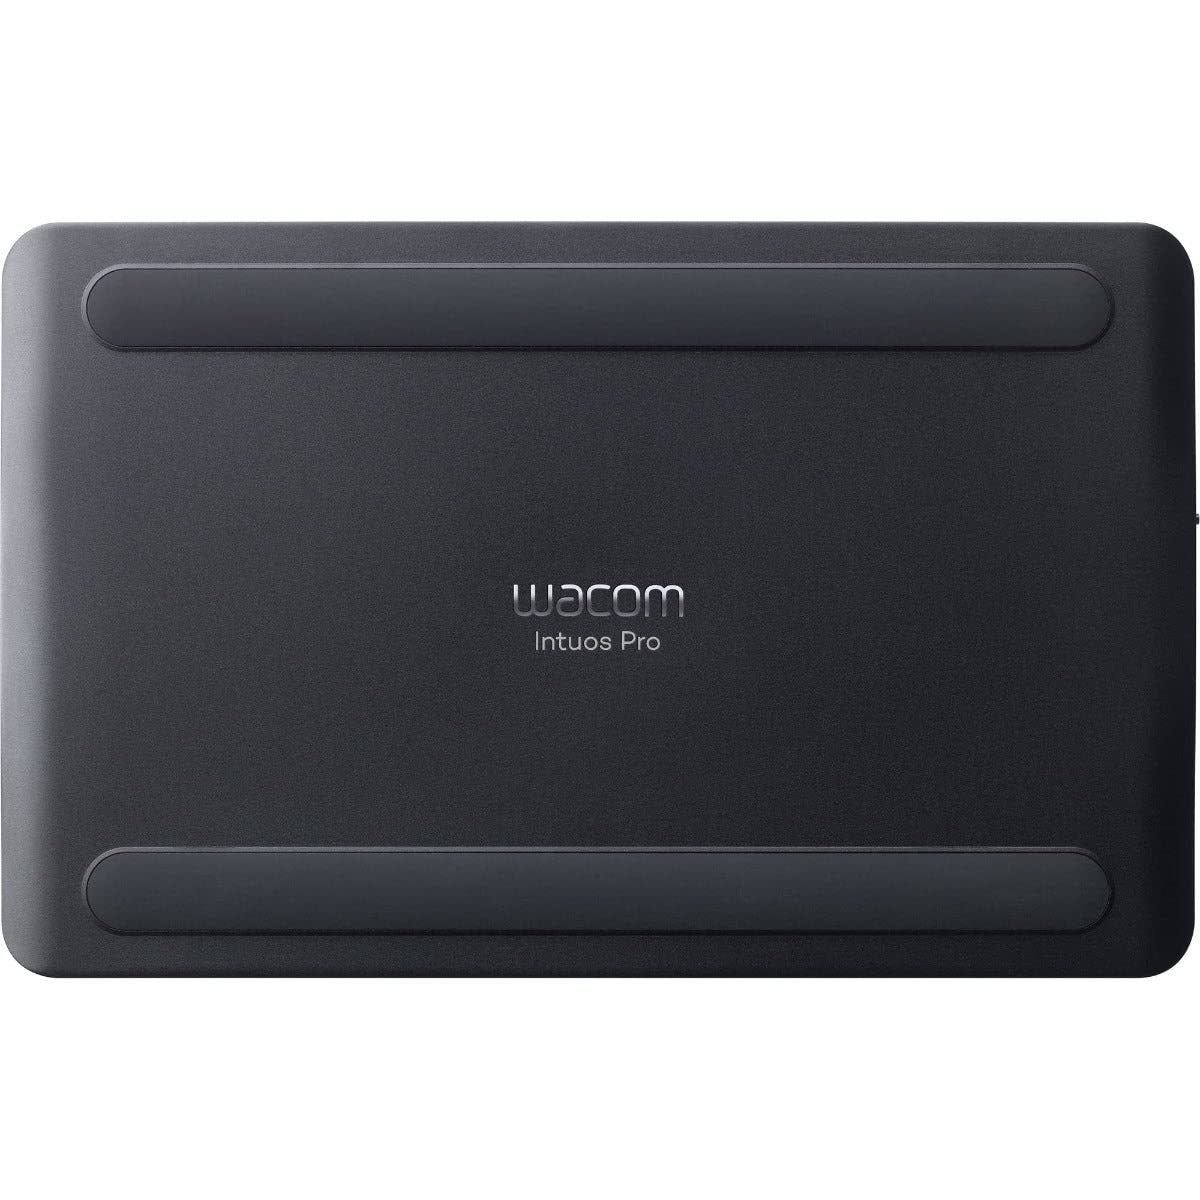 Wacom Intuos Pro Digital Graphic Drawing Tablet for Mac or PC, Small (PTH-460/K0-CX)